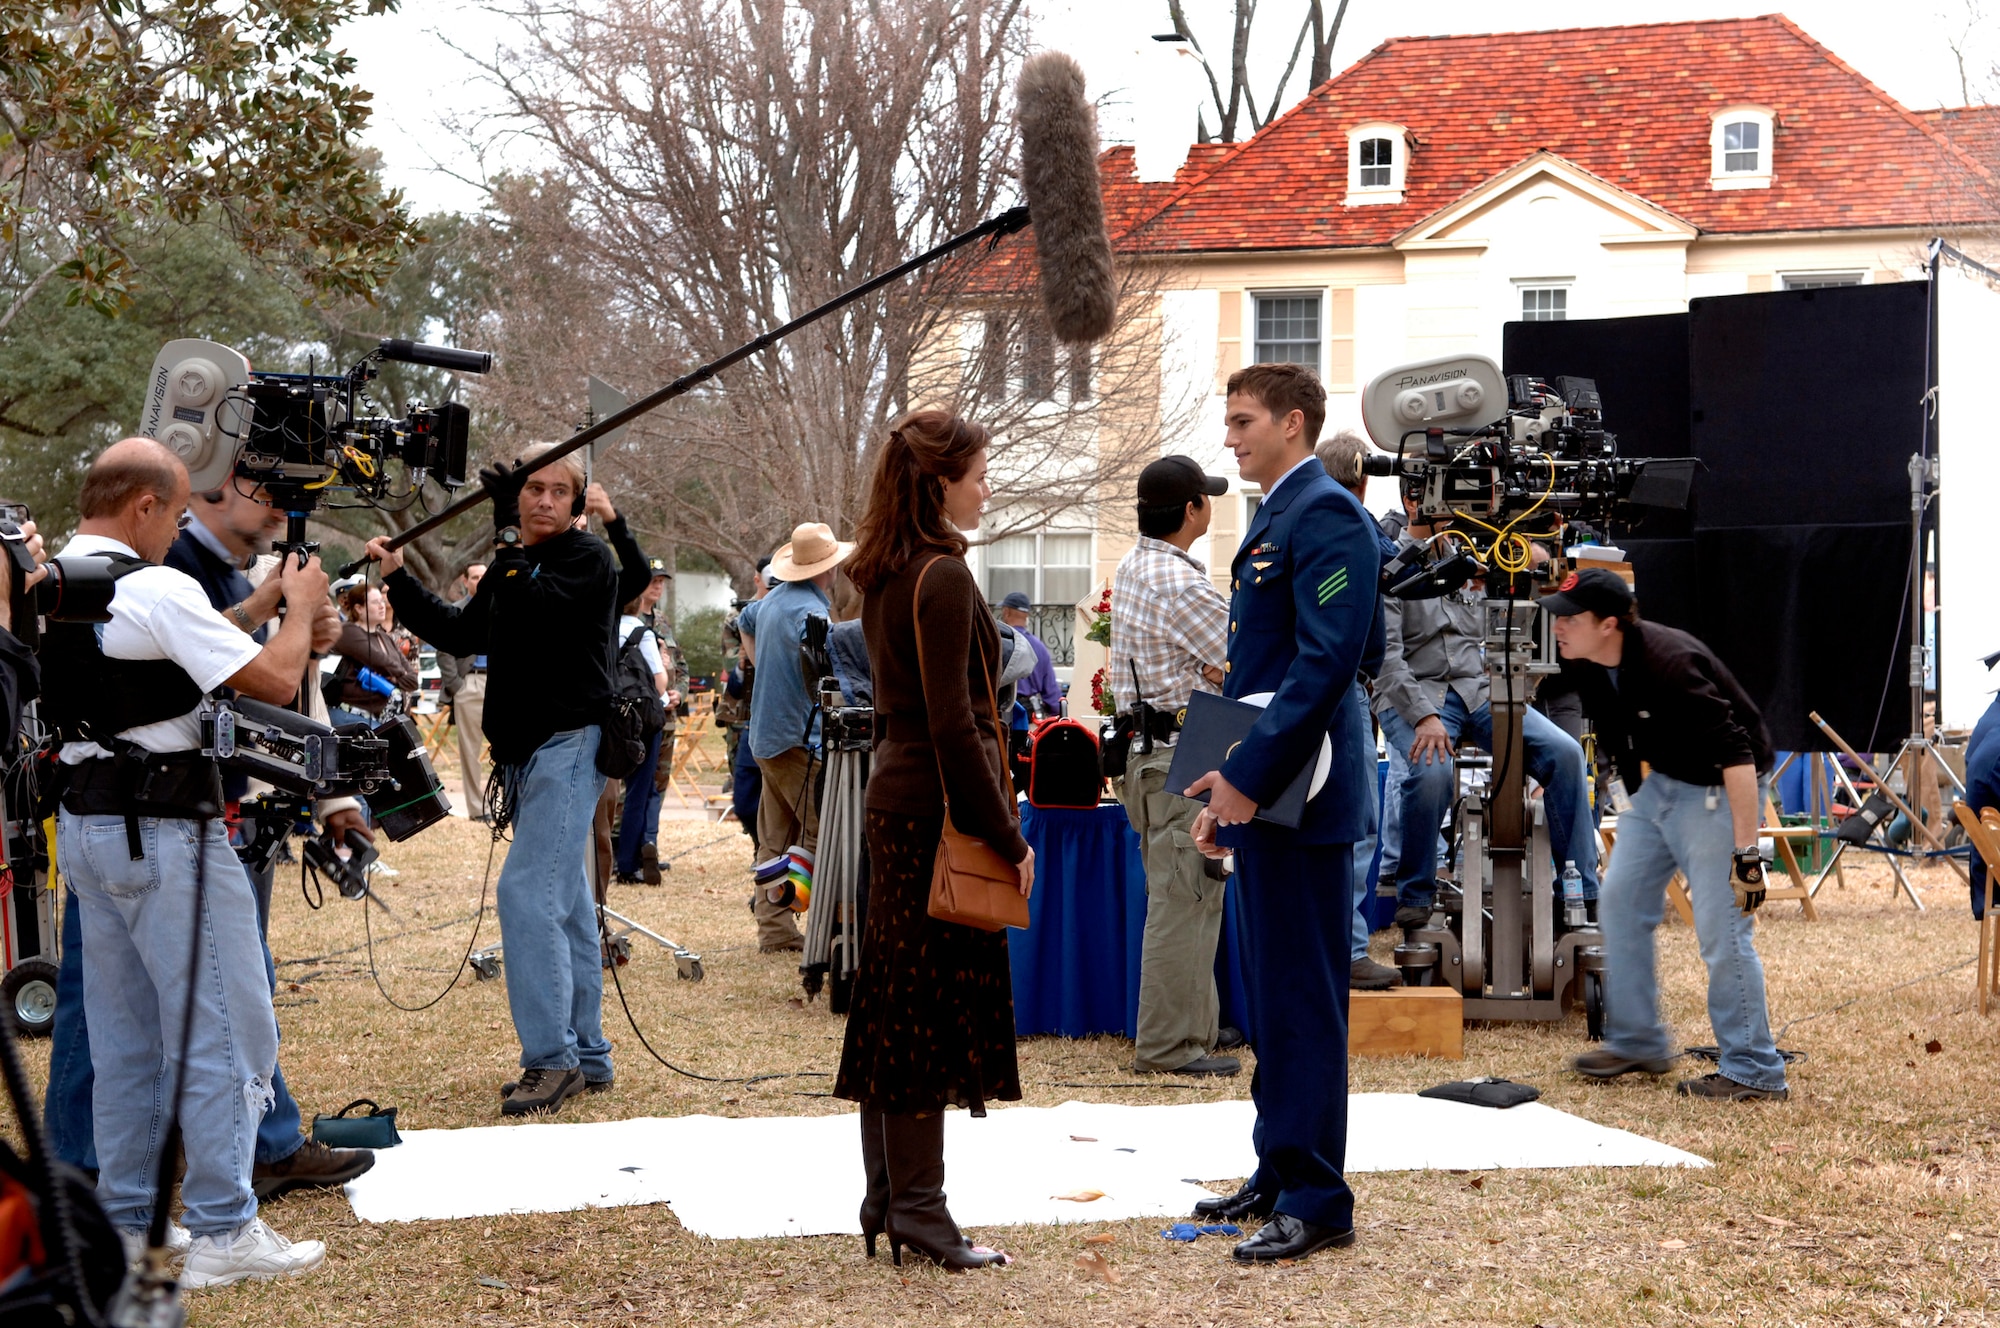 BARKSDALE AIR FORCE BASE, La. (AFPN) -- Ashton Kutcher and Shelby Fenner films a scene from the movie "The Guardian." Parts of the movie were filmed on base Jan. 12 and 13. (U.S. Air Force photo by Master Sgt. Michael Kaplan)